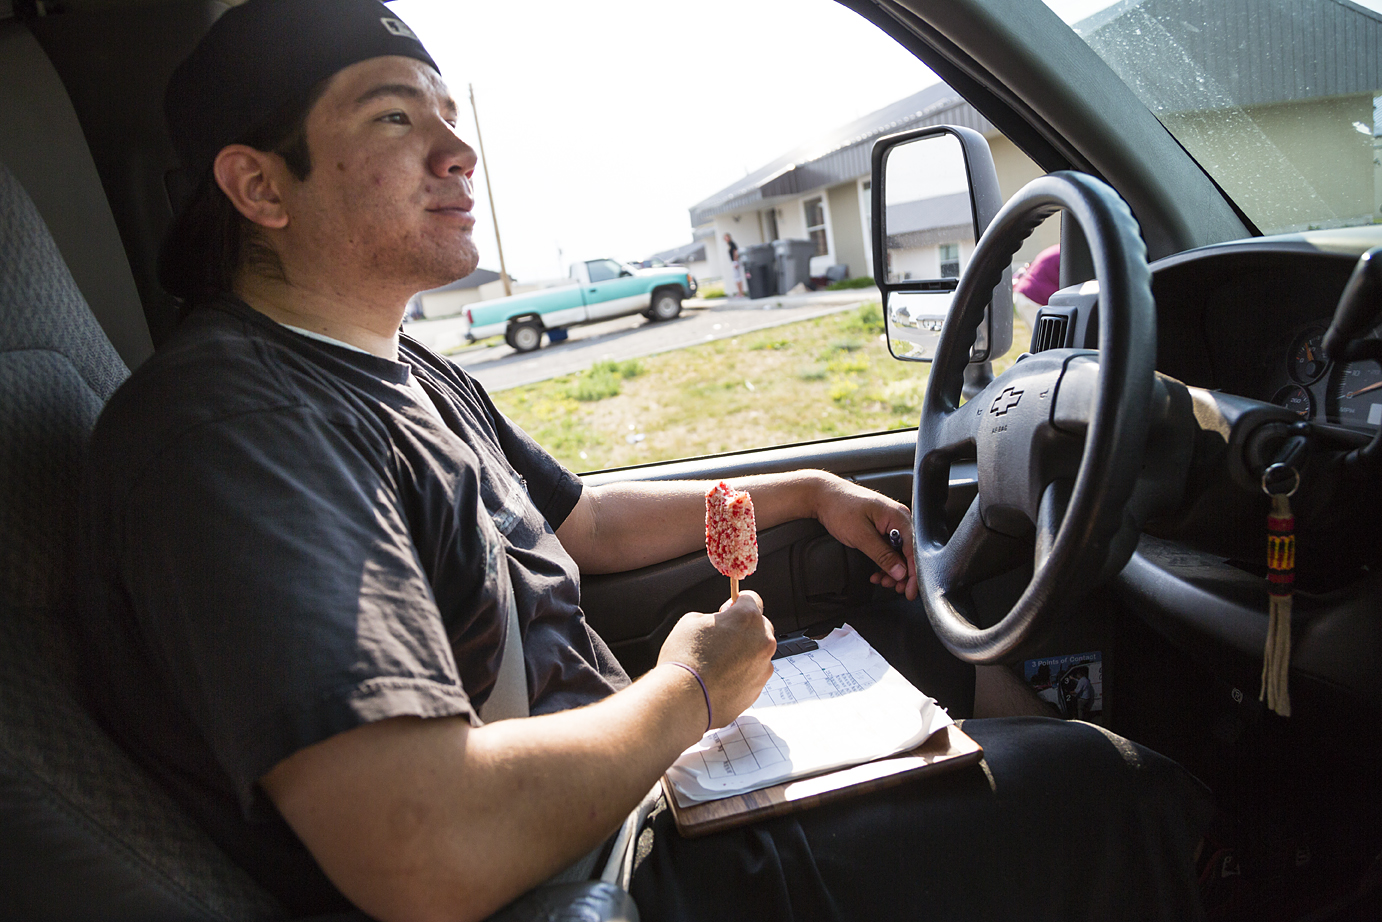 A story of young entrepreneurship and hope on a Montana Indian Reservation.